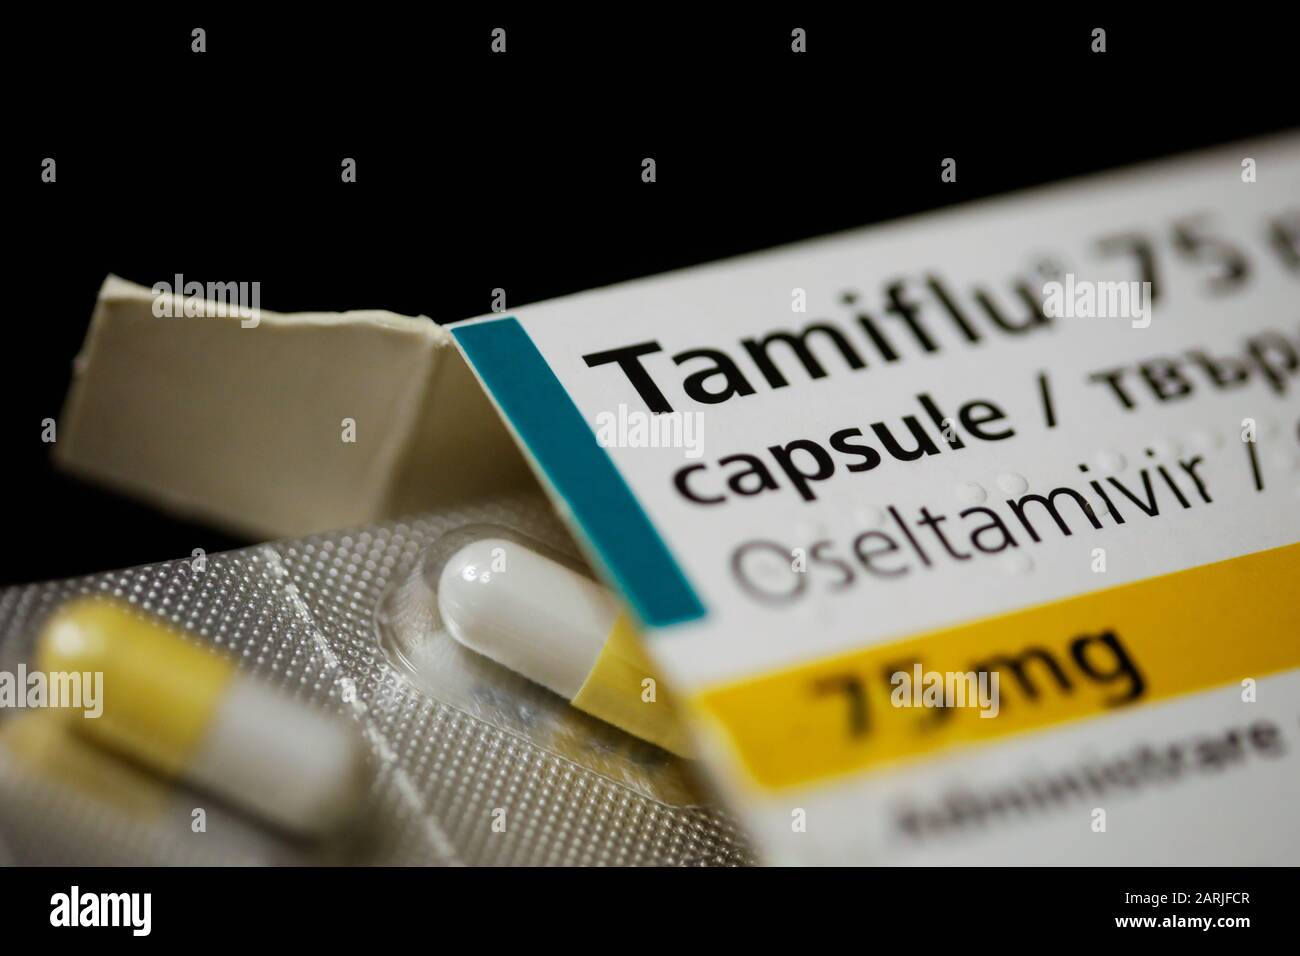 Bucharest, Romania - January 26, 2020: Close up image with a Tamiflu capsule (oseltamivir) on a blister pack, an antiviral medication that blocks the Stock Photo